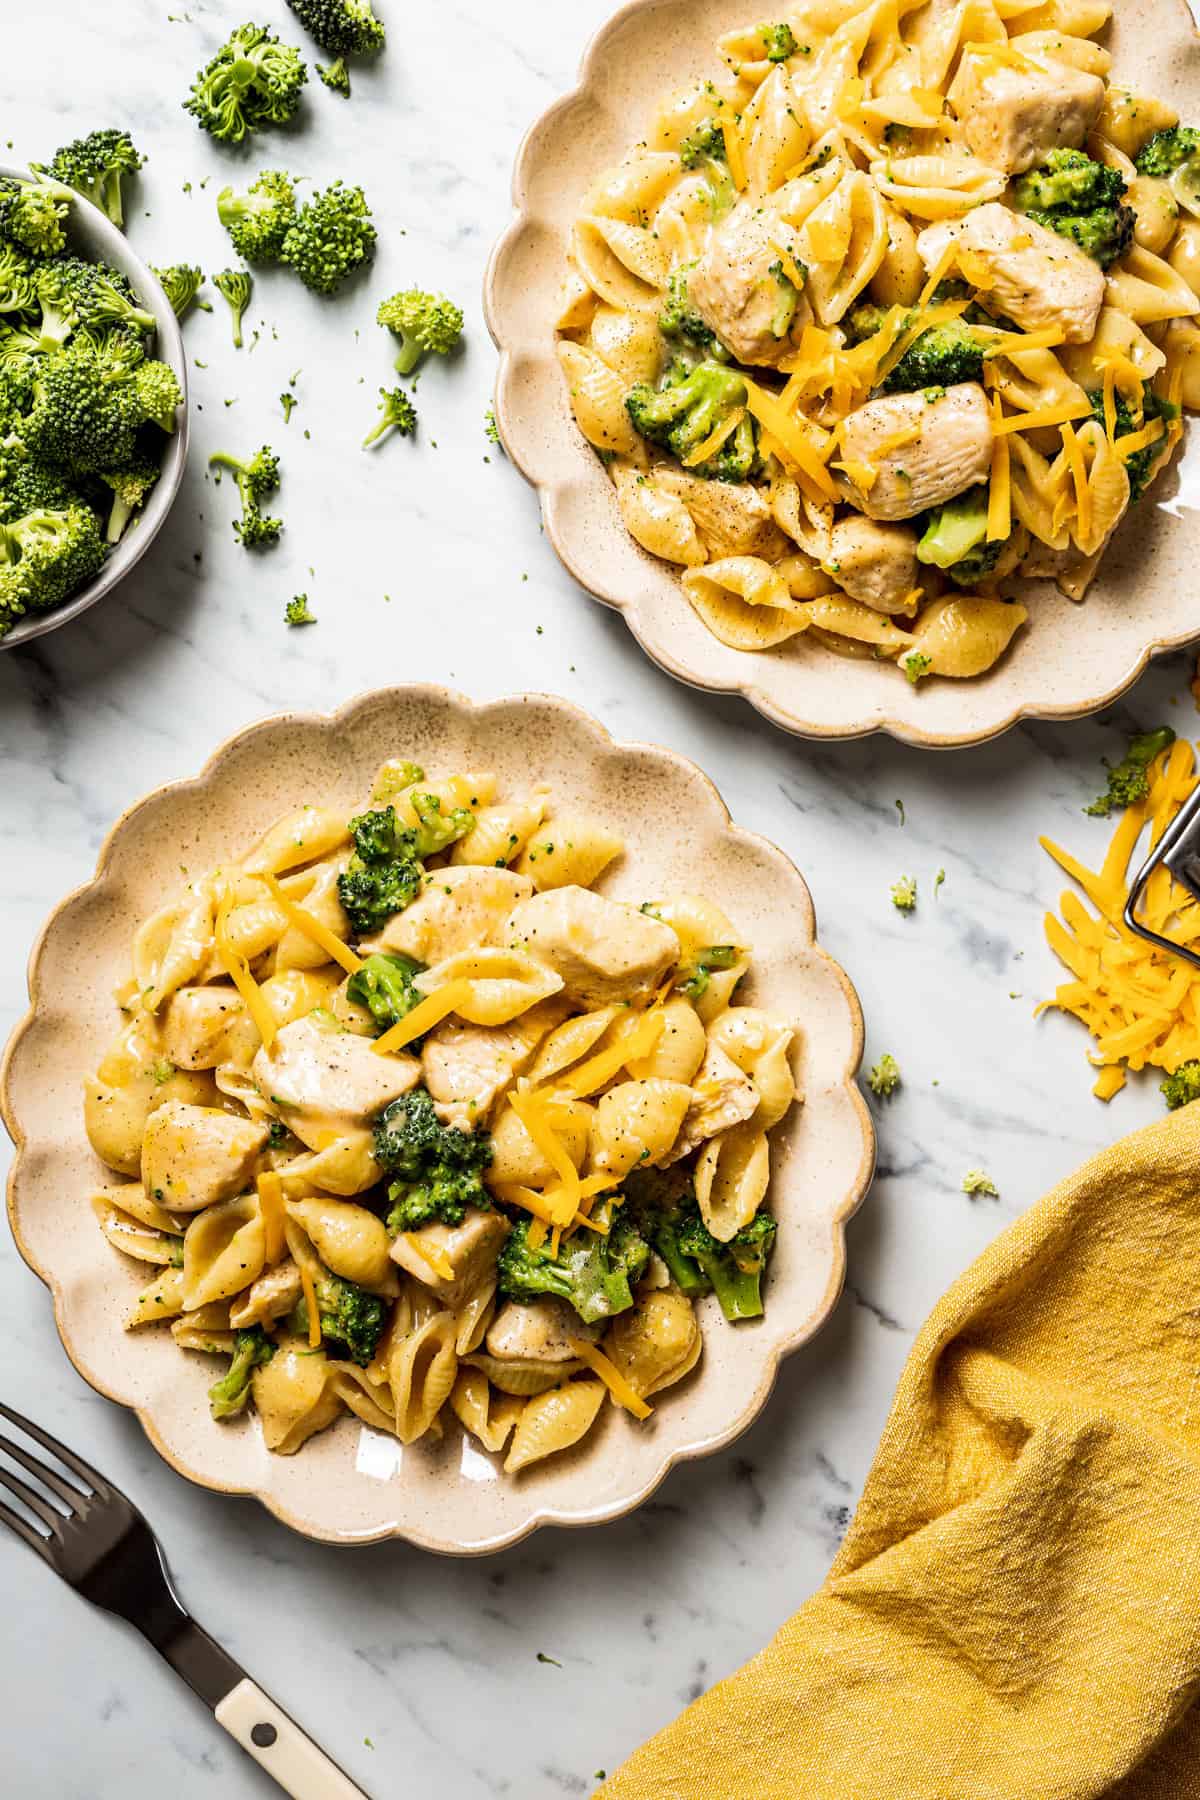 Overhead view of two plates of broccoli and chicken pasta, next to a bowl of broccoli, a fork, and a kitchen towel.